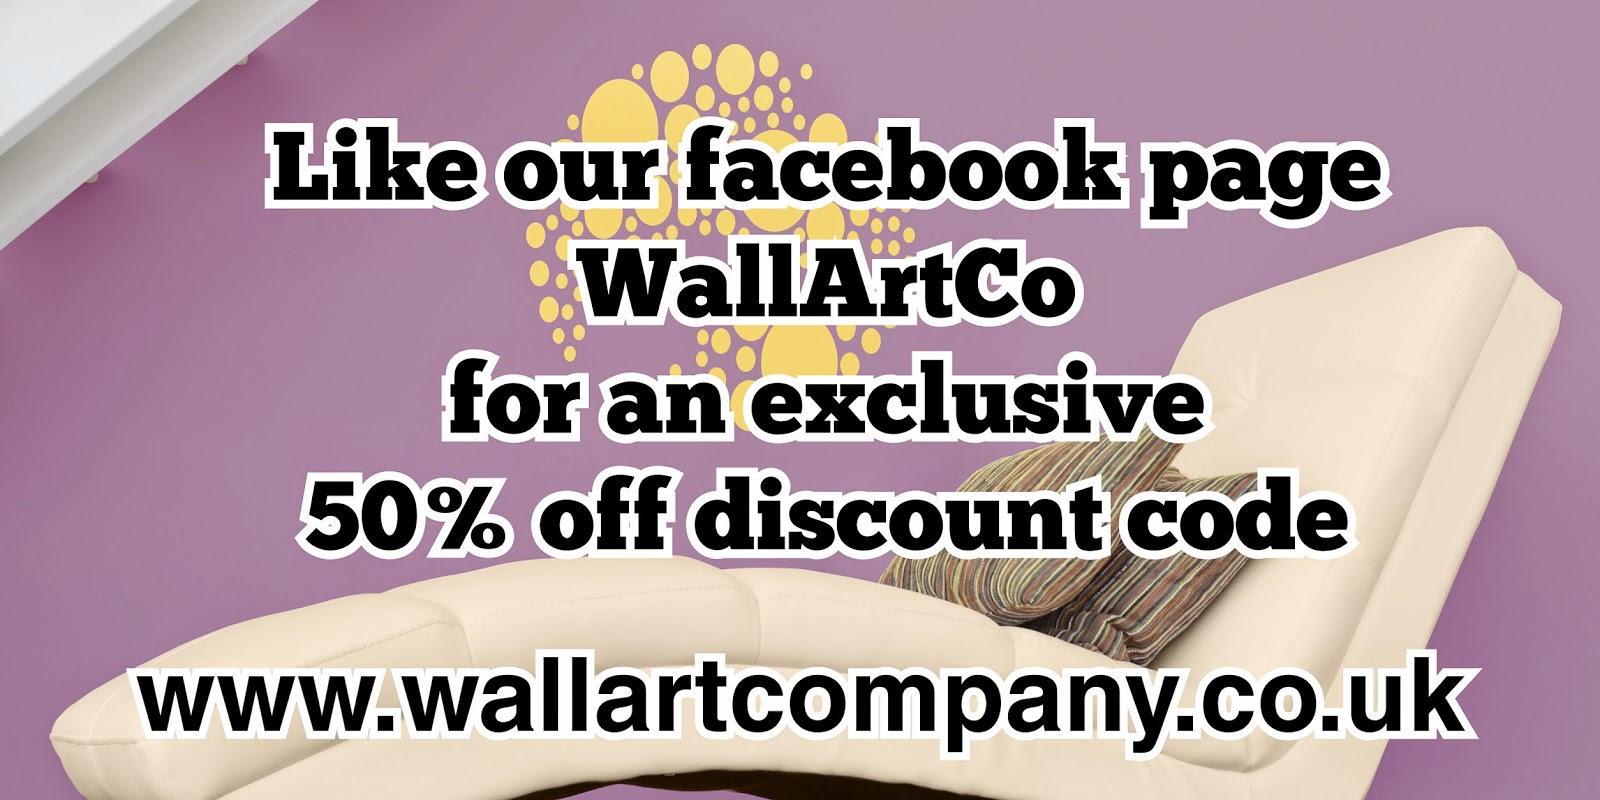 Like our facebook page WallArtCo for an exclusive 50% off discount code. Vinyl decals, wall art, quotes, designs. www.wallartcompany.co.uk